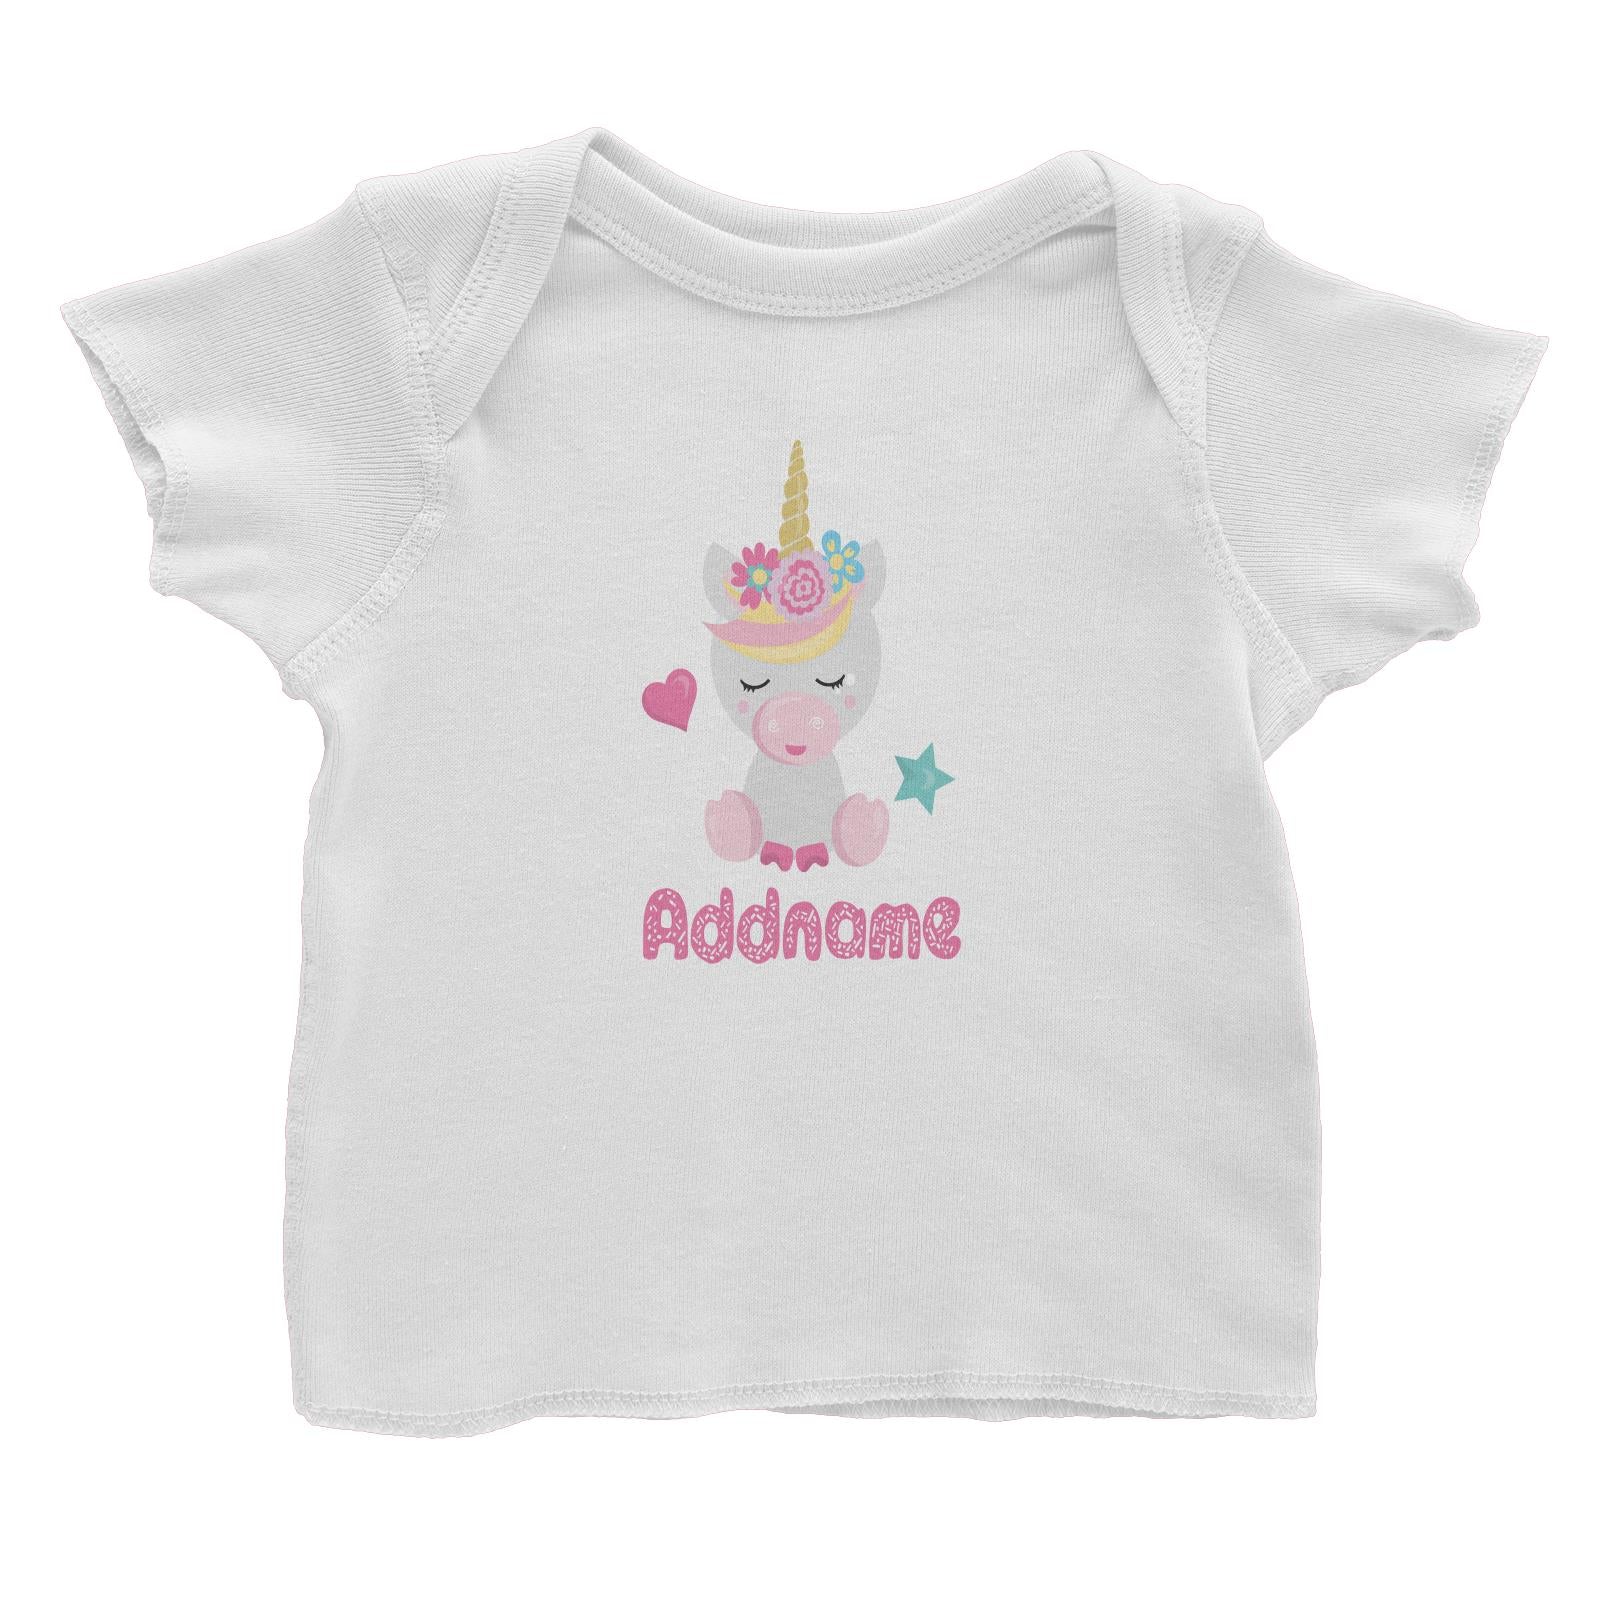 Magical Sweets Cute Unicorn Addname Baby T-Shirt